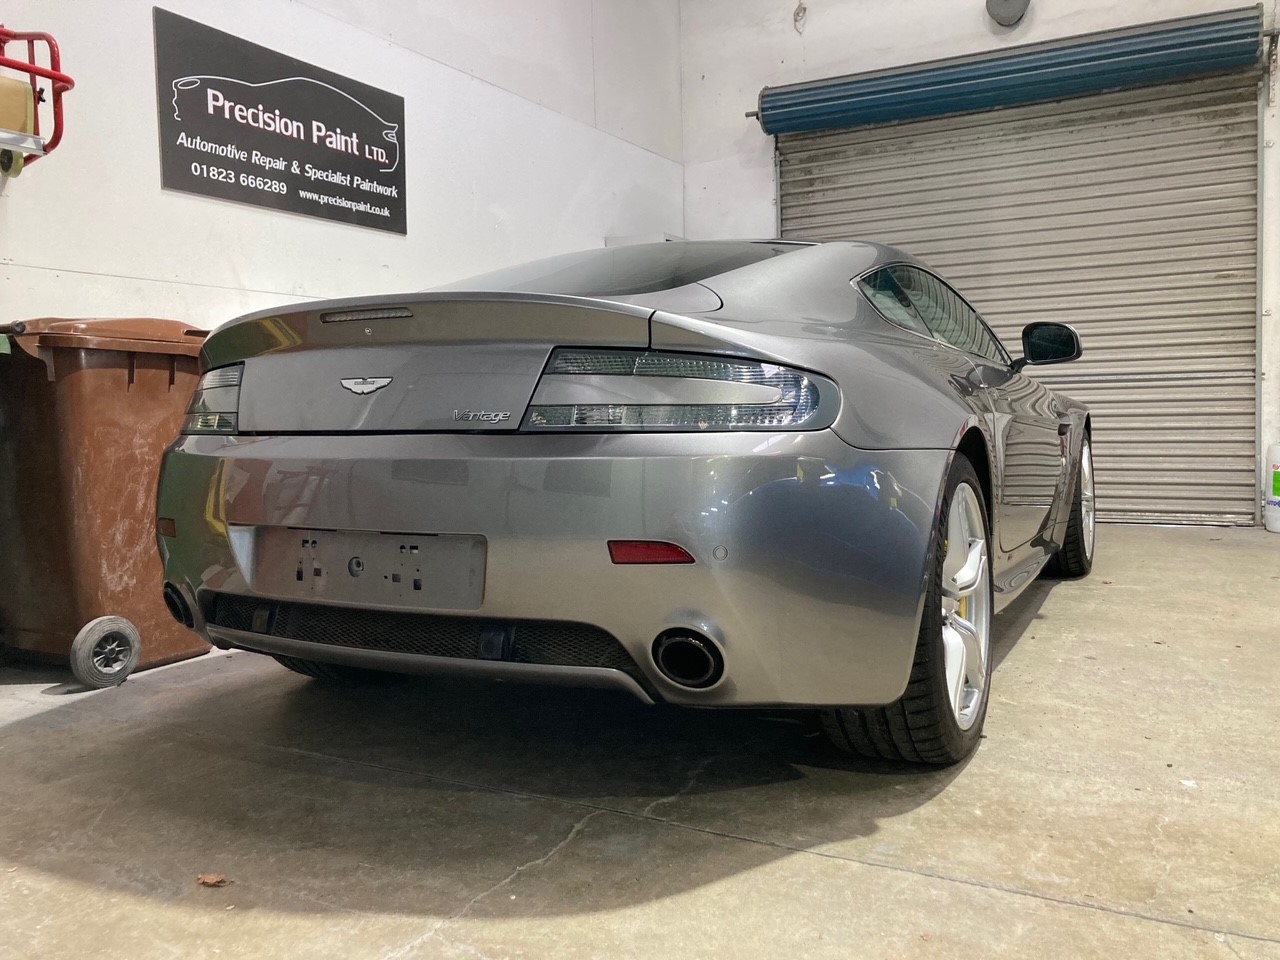 Aston Martin V8 Vantage - Given new lease of life by Precision Paint, Wellington